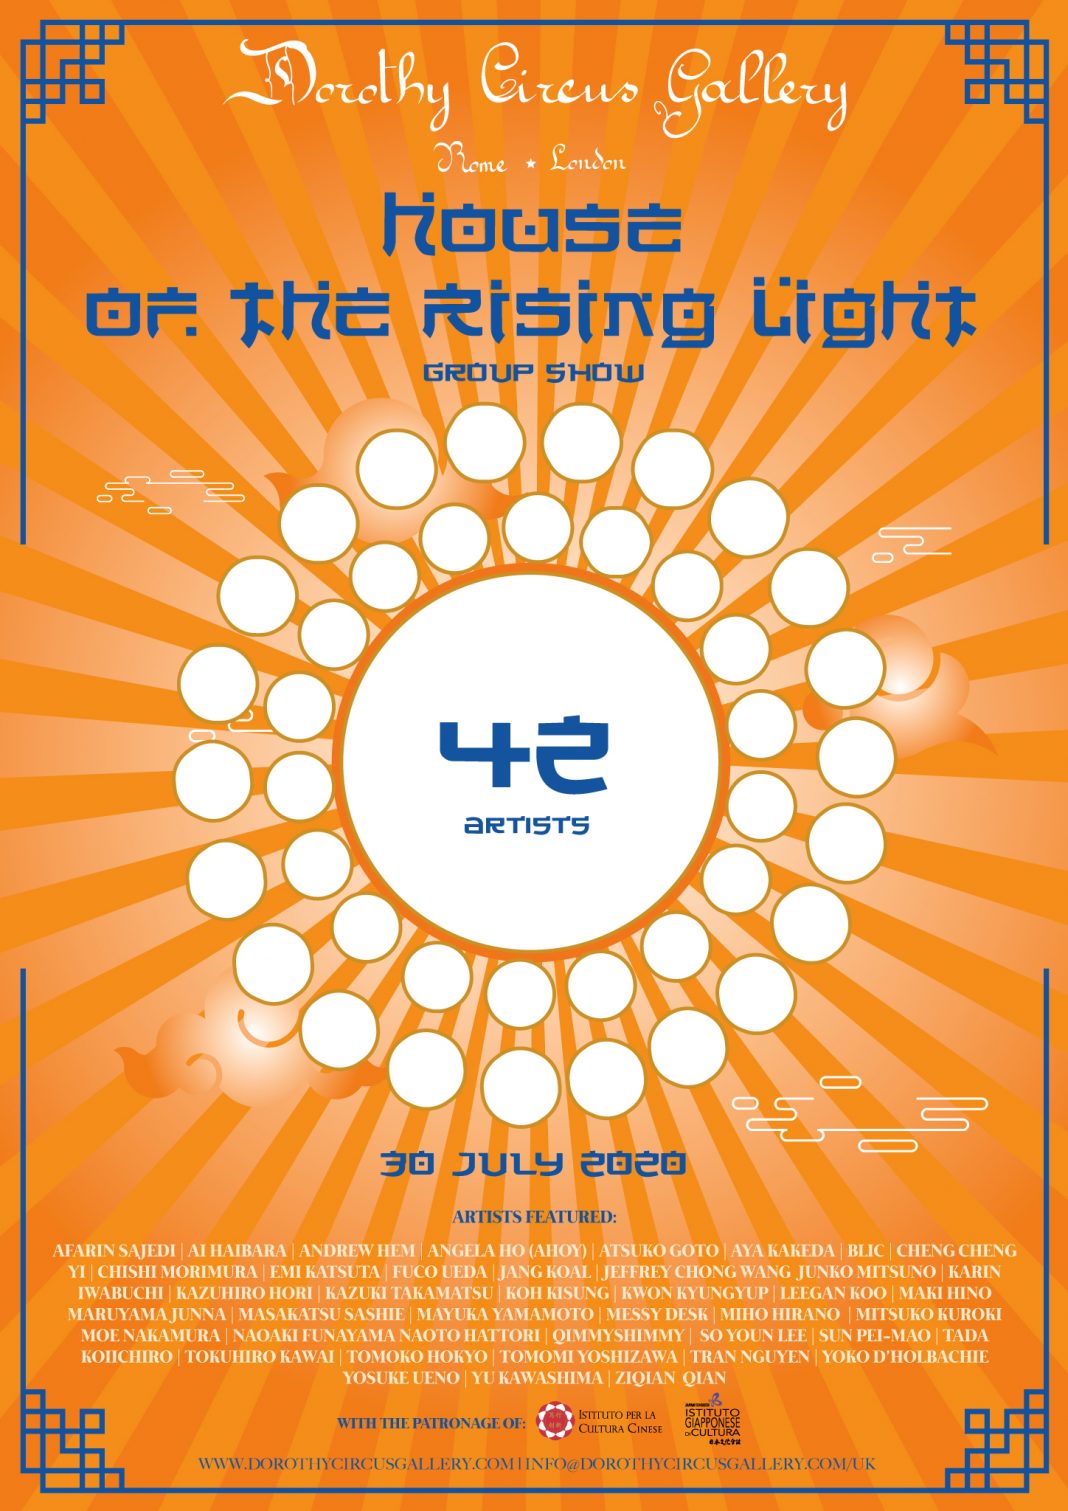 The House of the Rising Lightshttps://www.exibart.com/repository/media/formidable/11/Poster-Asian-Show-1068x1511.jpg